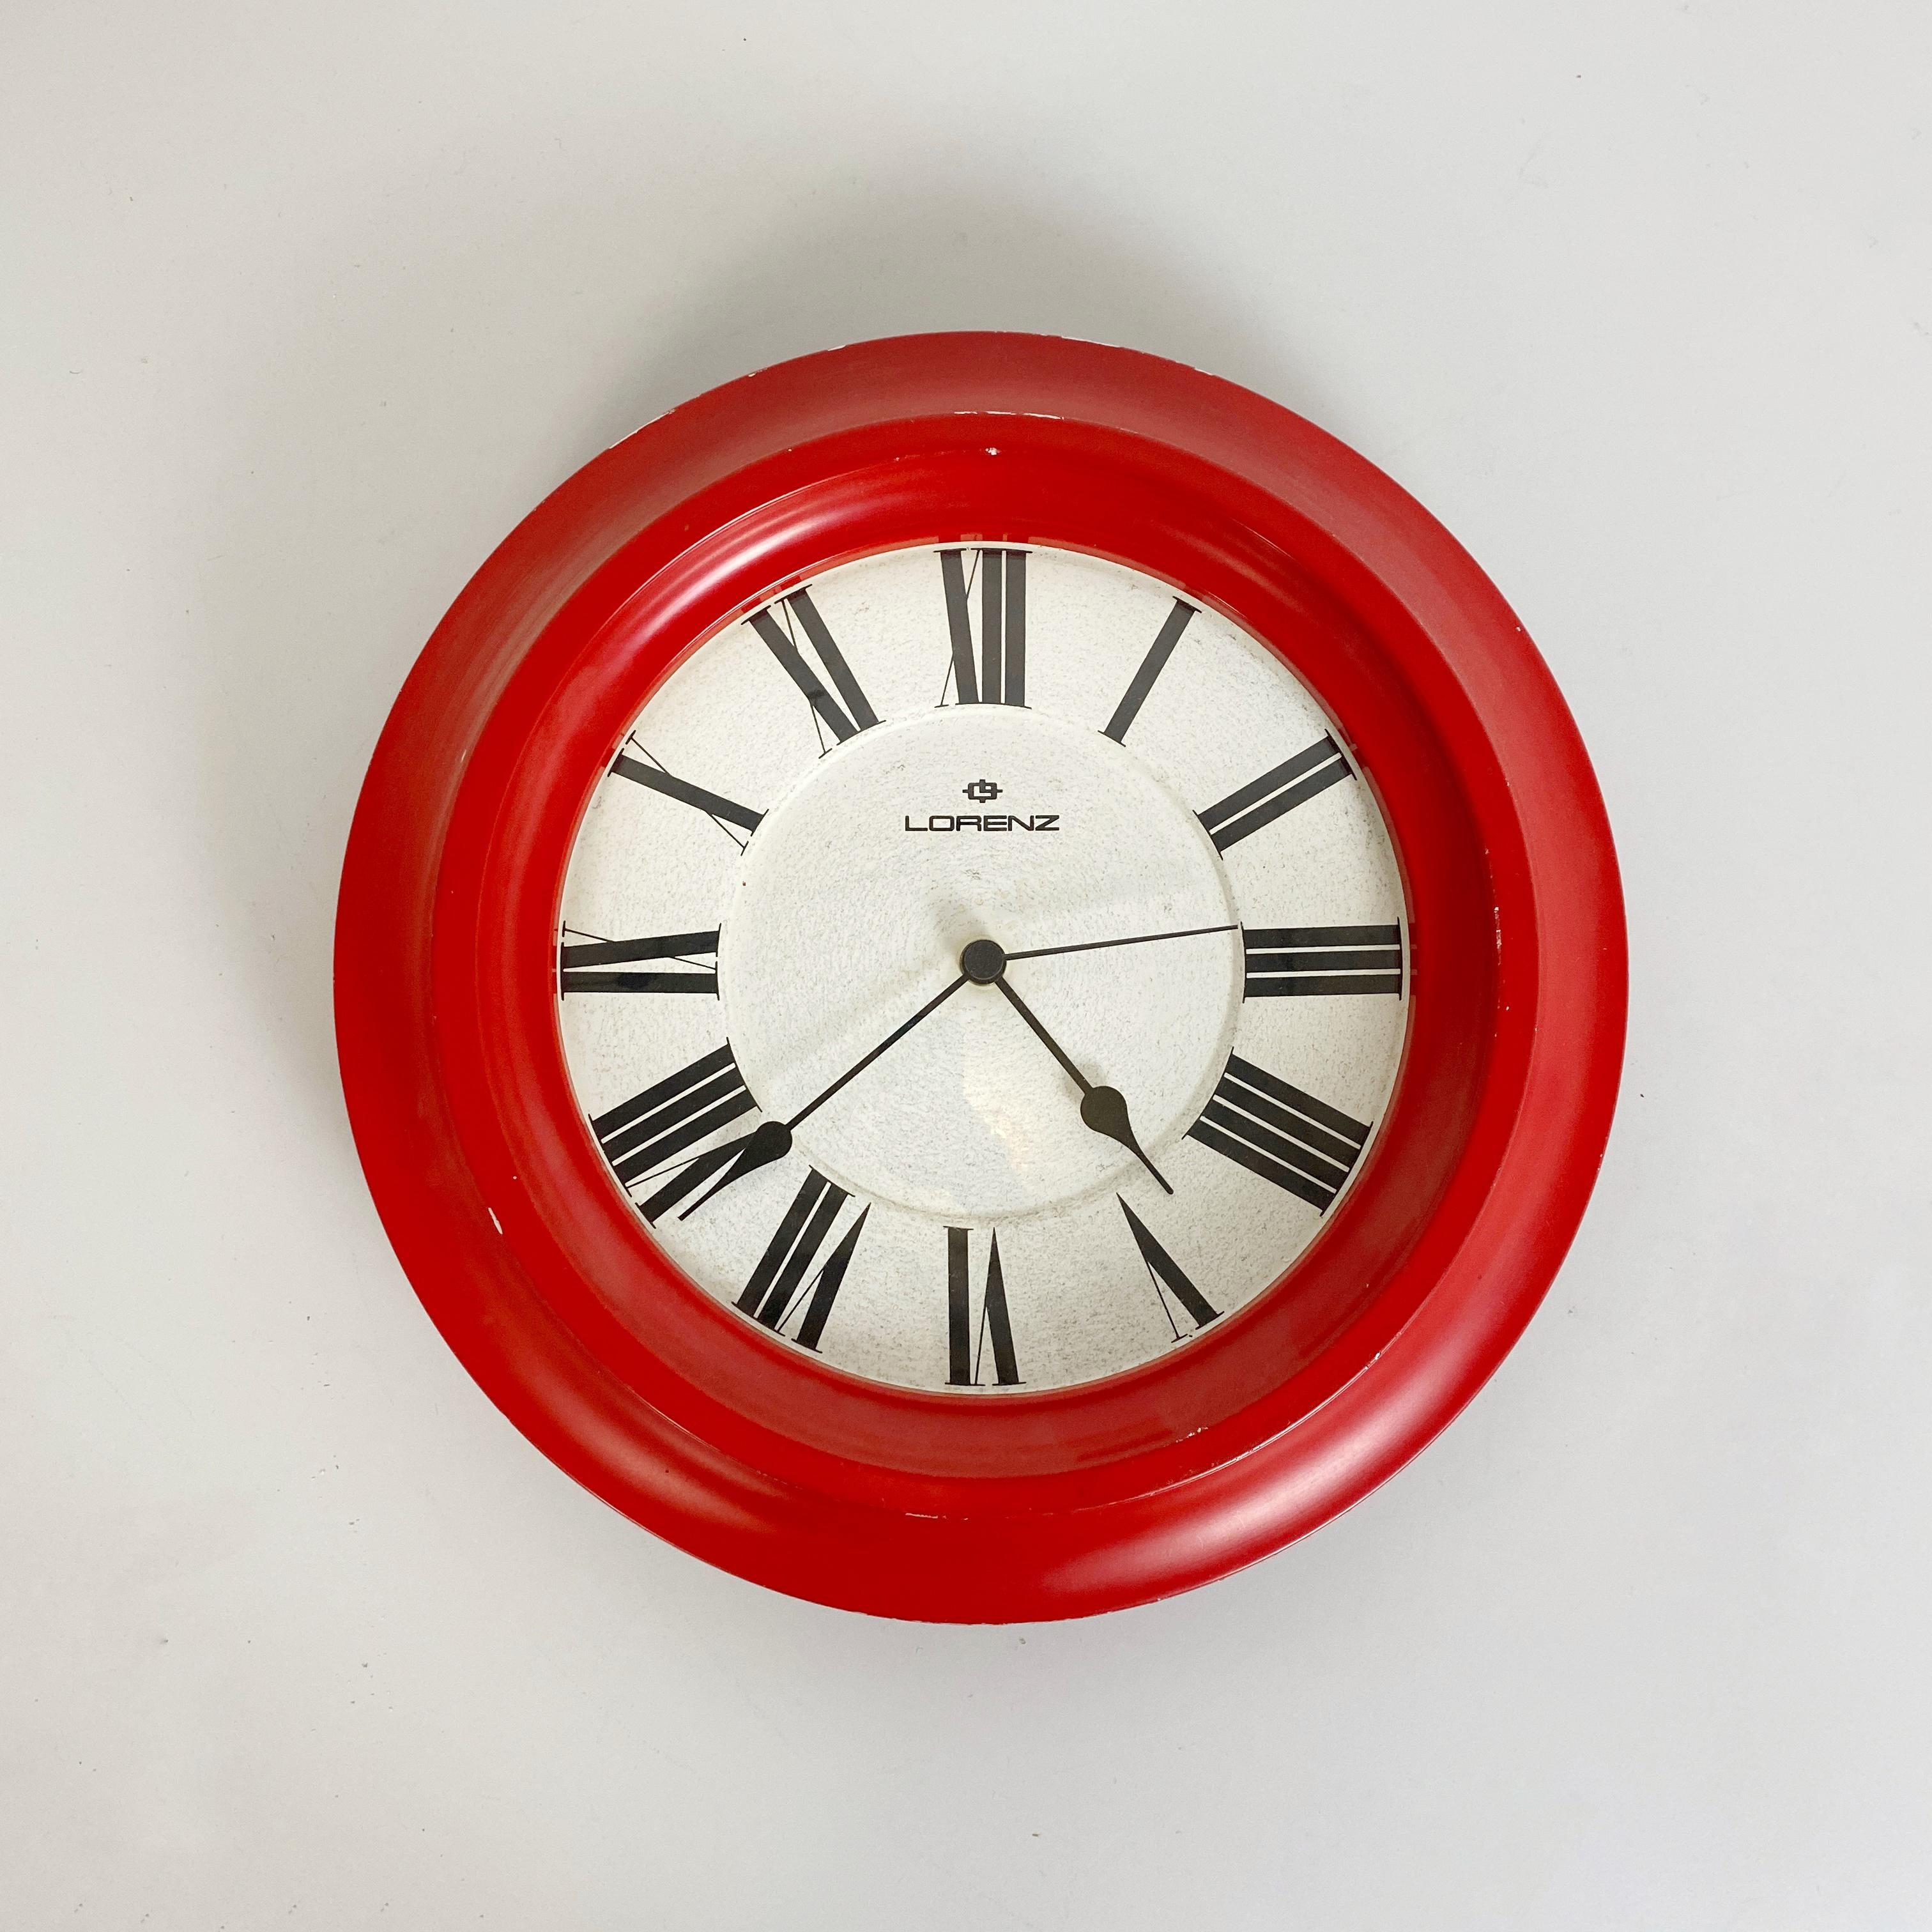 Italian Mid-Century Modern round red wall clock by Lorenz, 1970s
Round wall clock in red painted metal with white dial and black numbers. Made by Lorenaz in 1970 ca.
This is a perfect red touch for your house, kitchen or living.
We think can be a